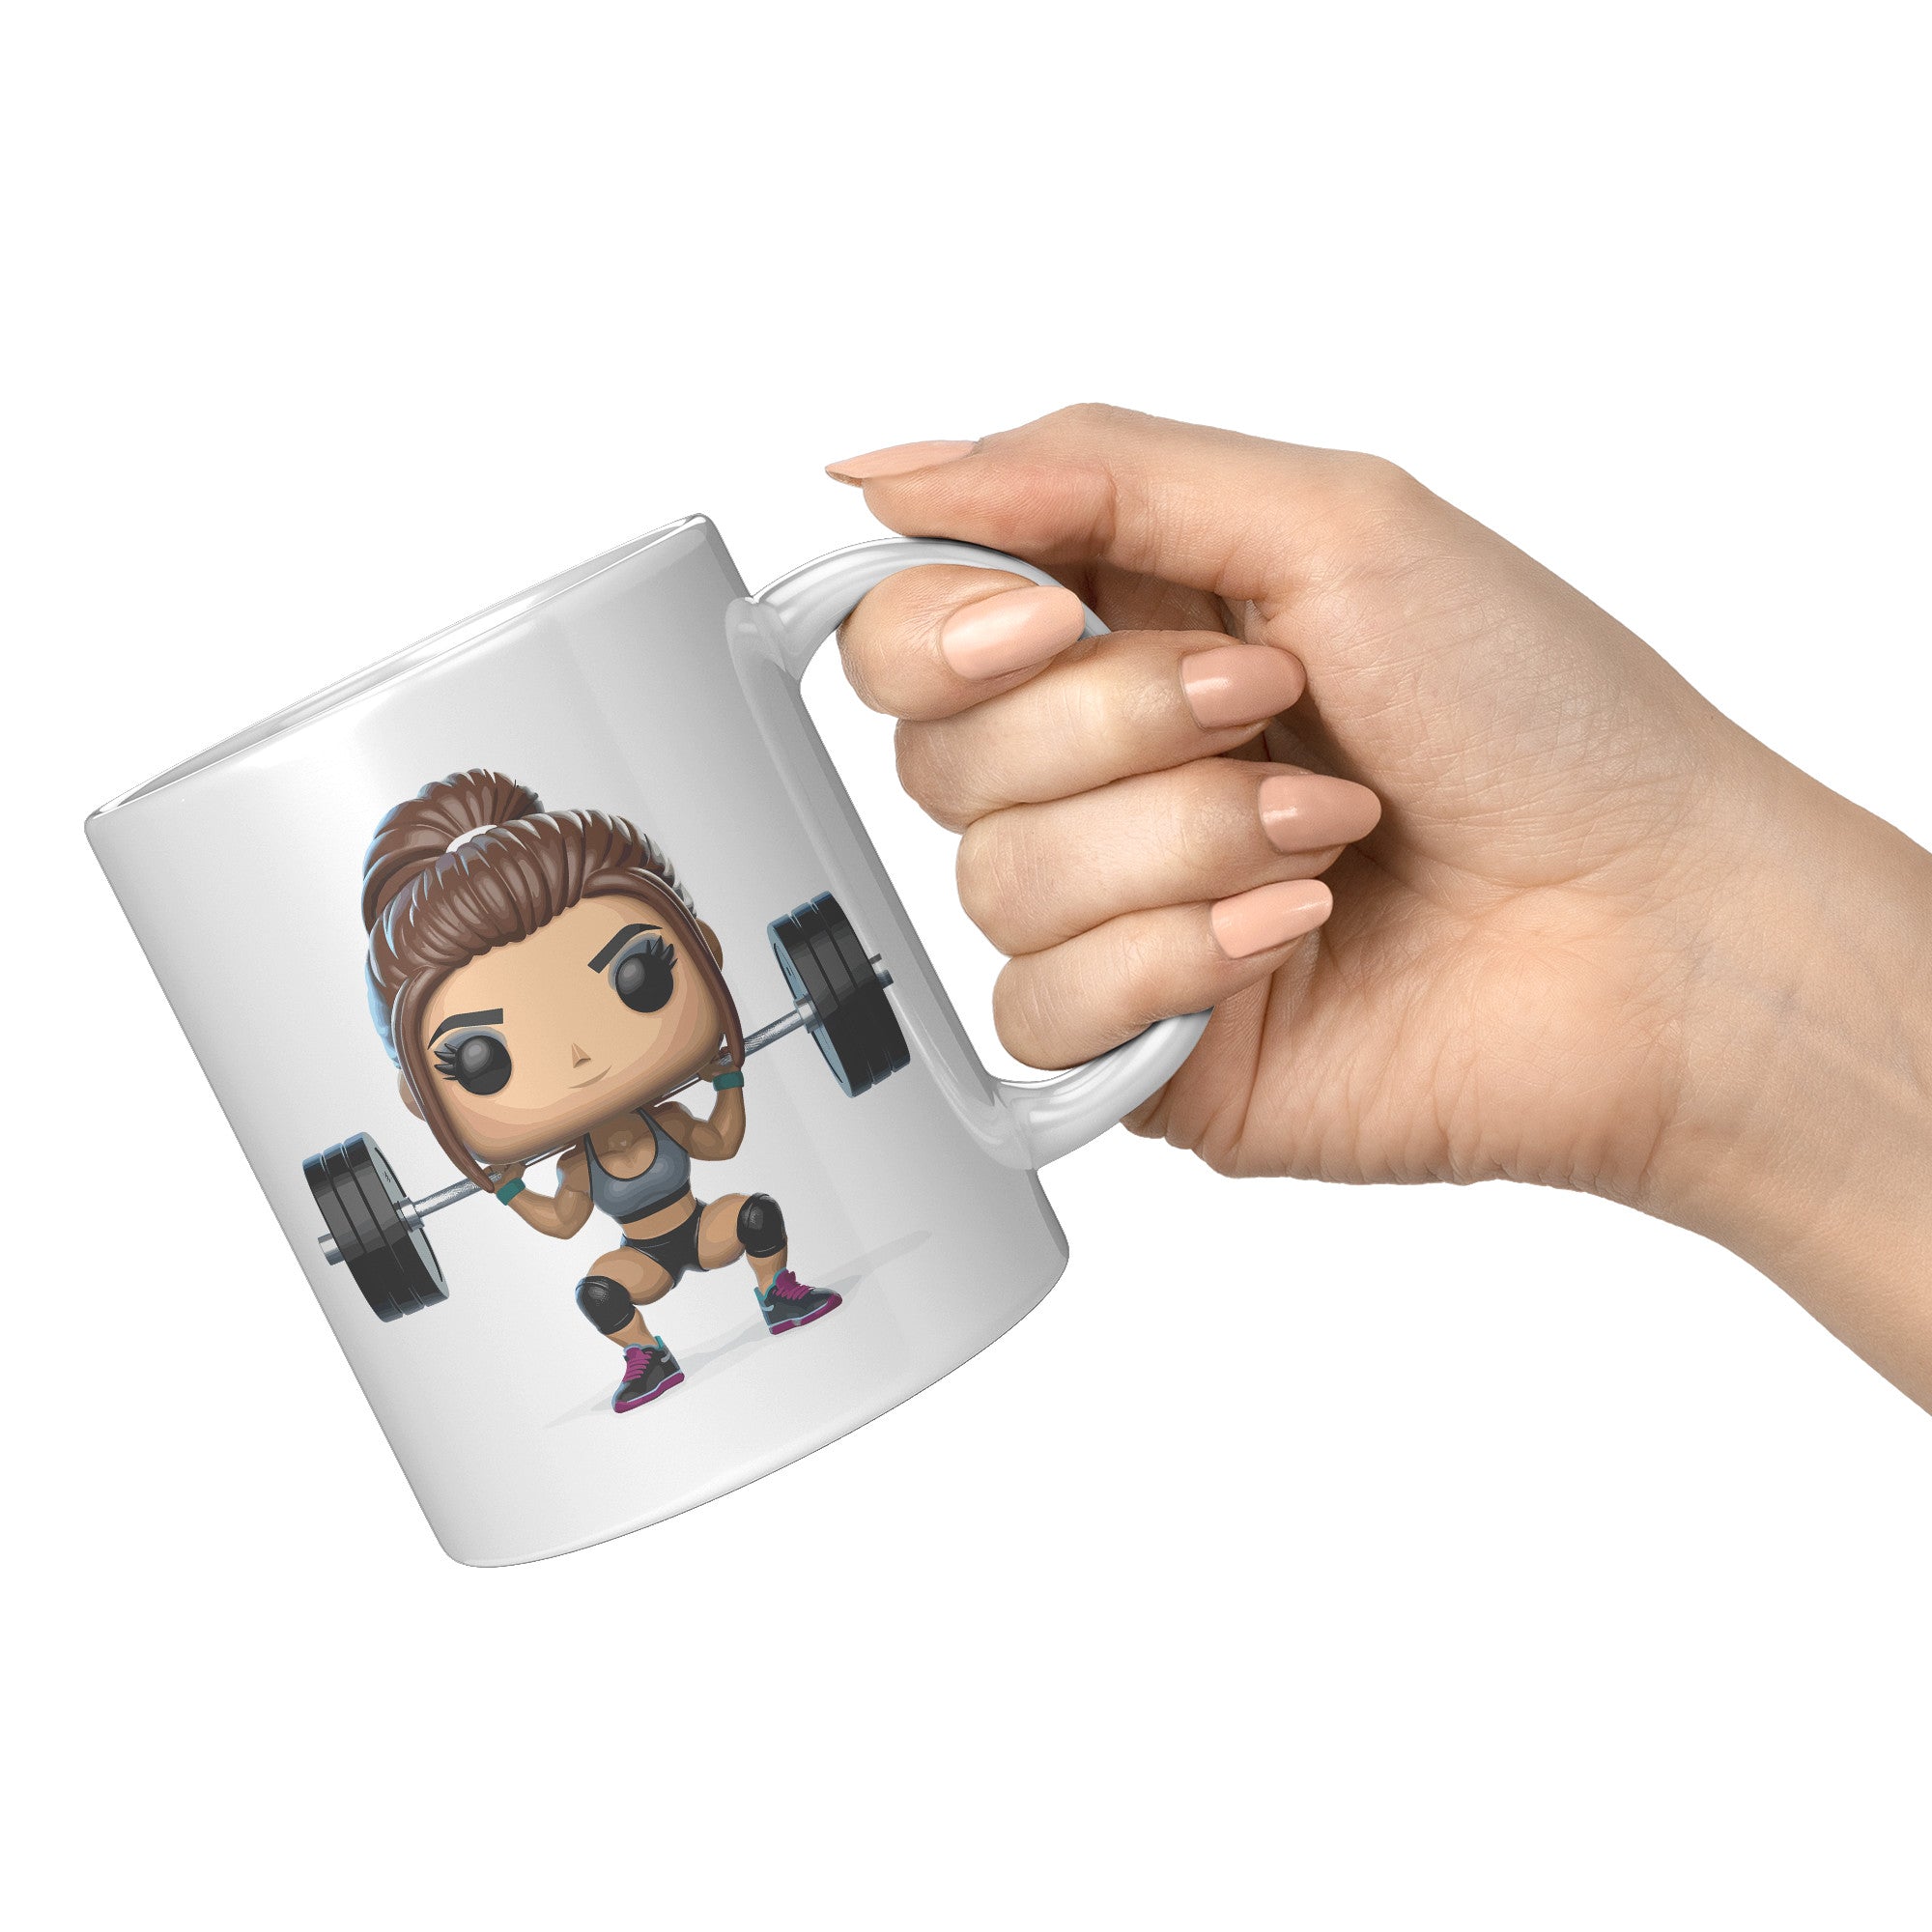 "CrossFit Funko Pop Style Mug - Male Fitness Enthusiast Coffee Cup - Unique Gift for Gym Buffs - Fun Workout-Inspired Drinkware" - D